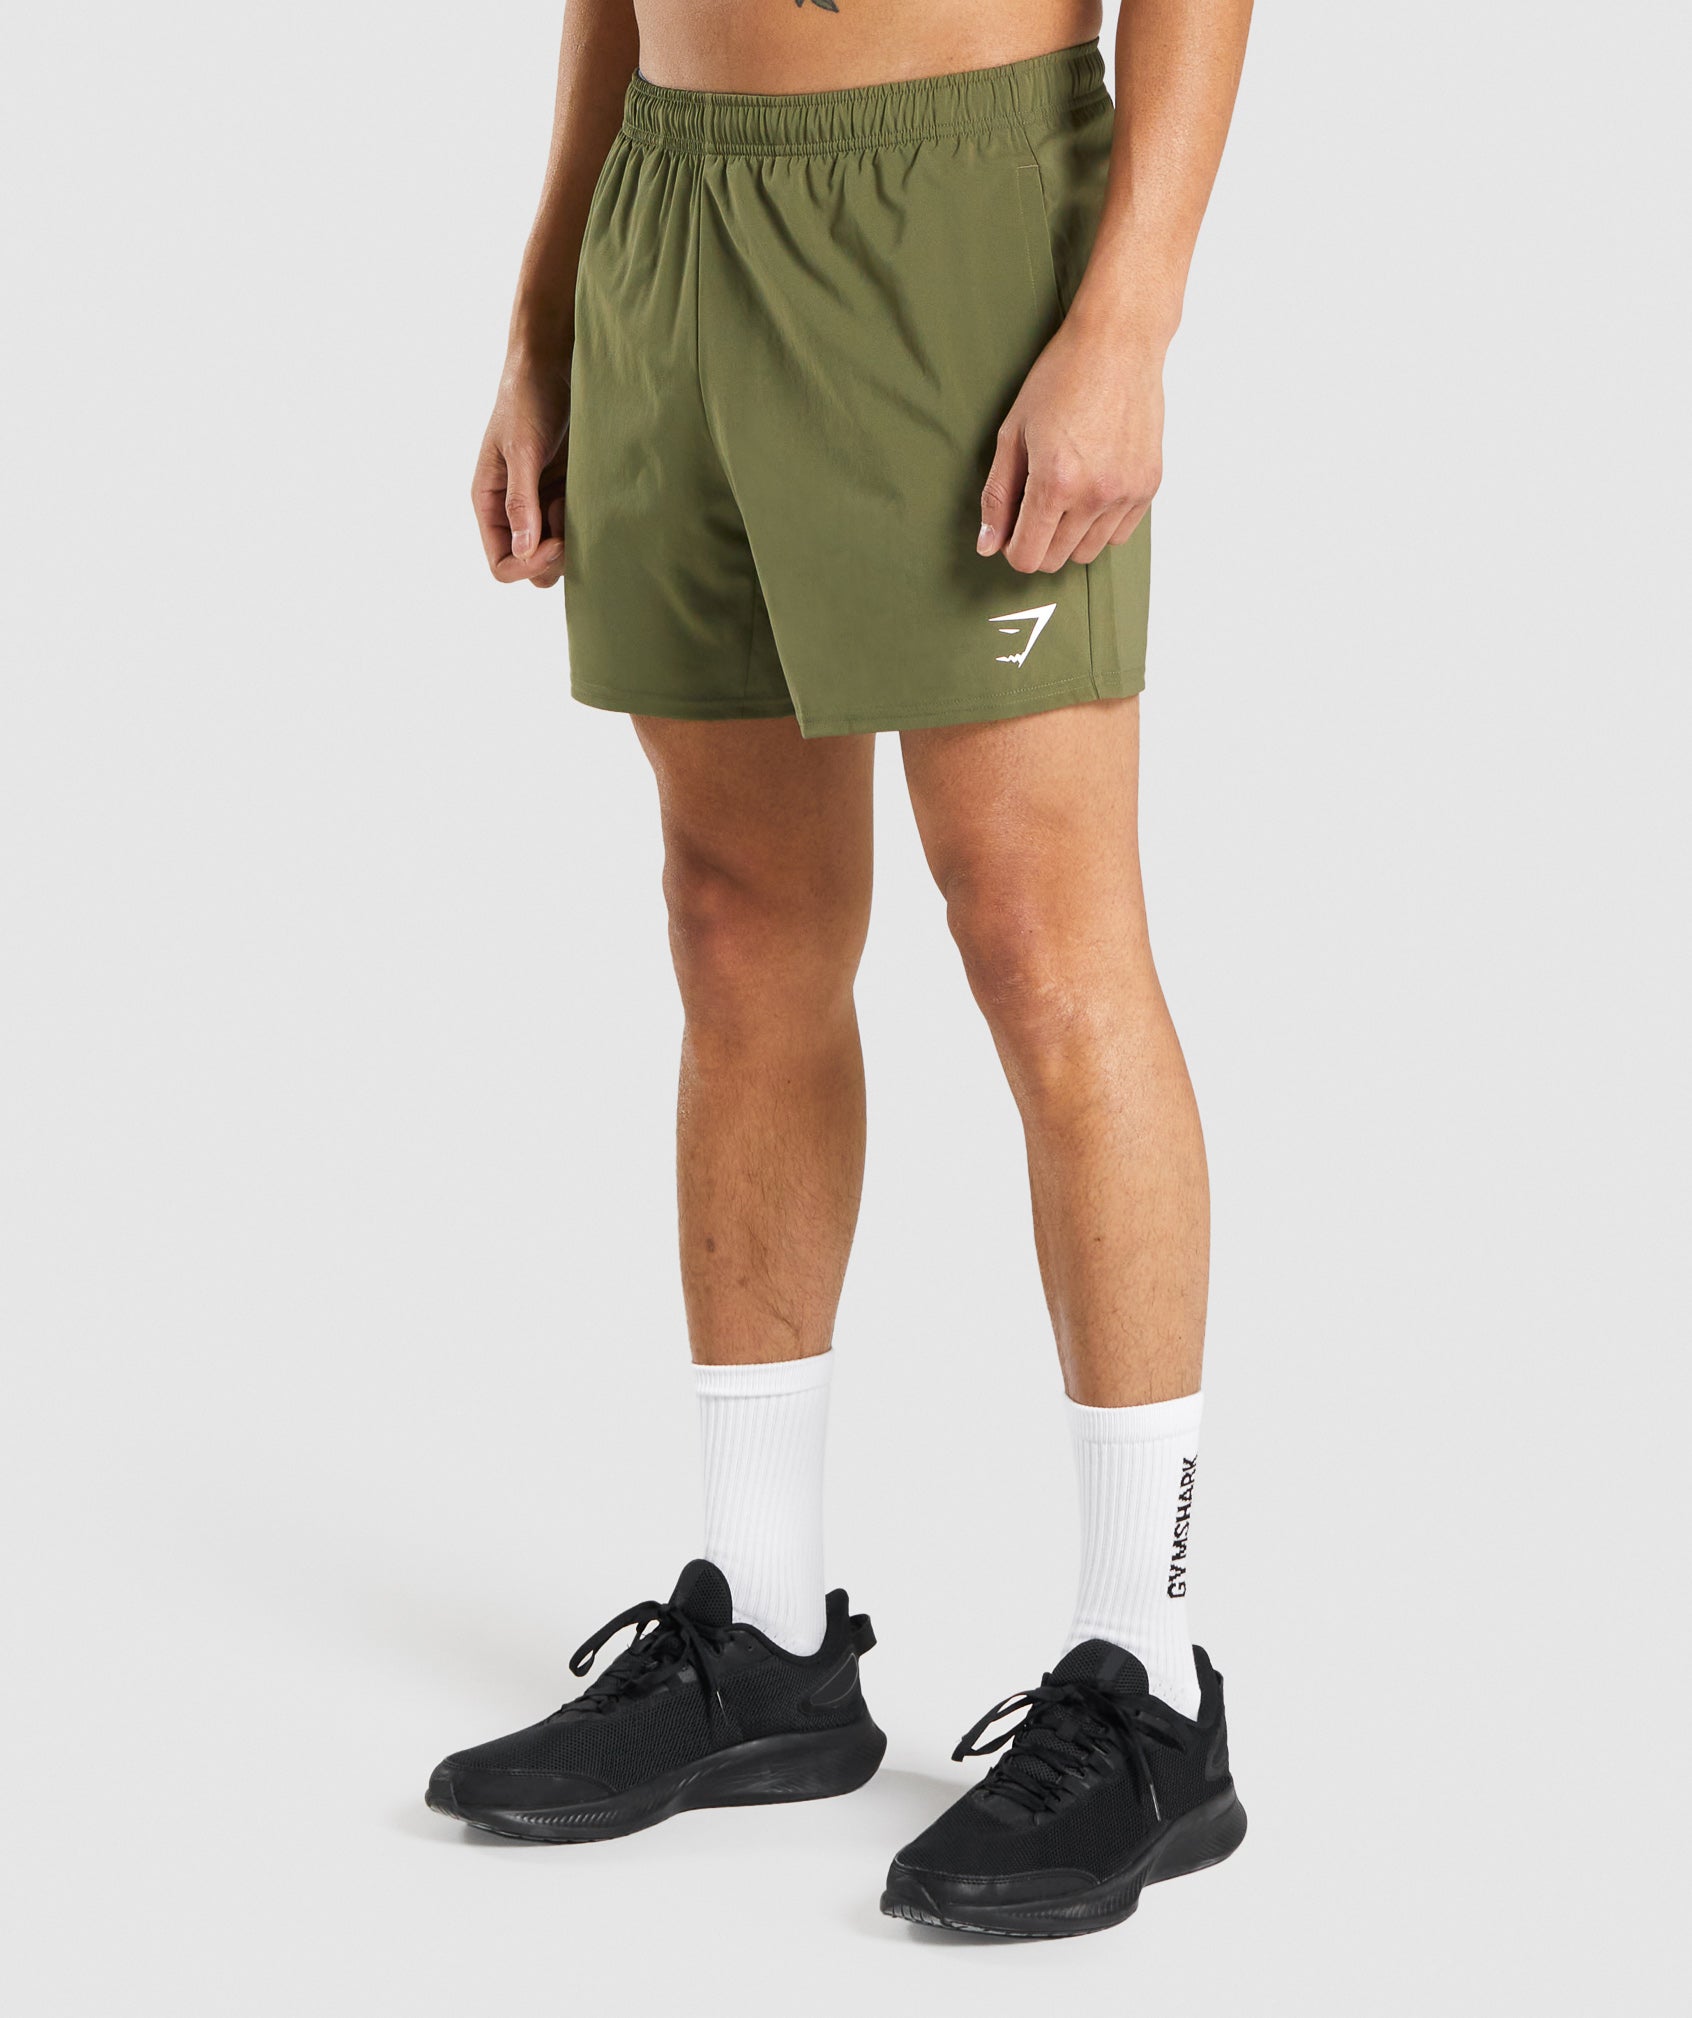 Arrival 5" Shorts in Dark Green - view 1